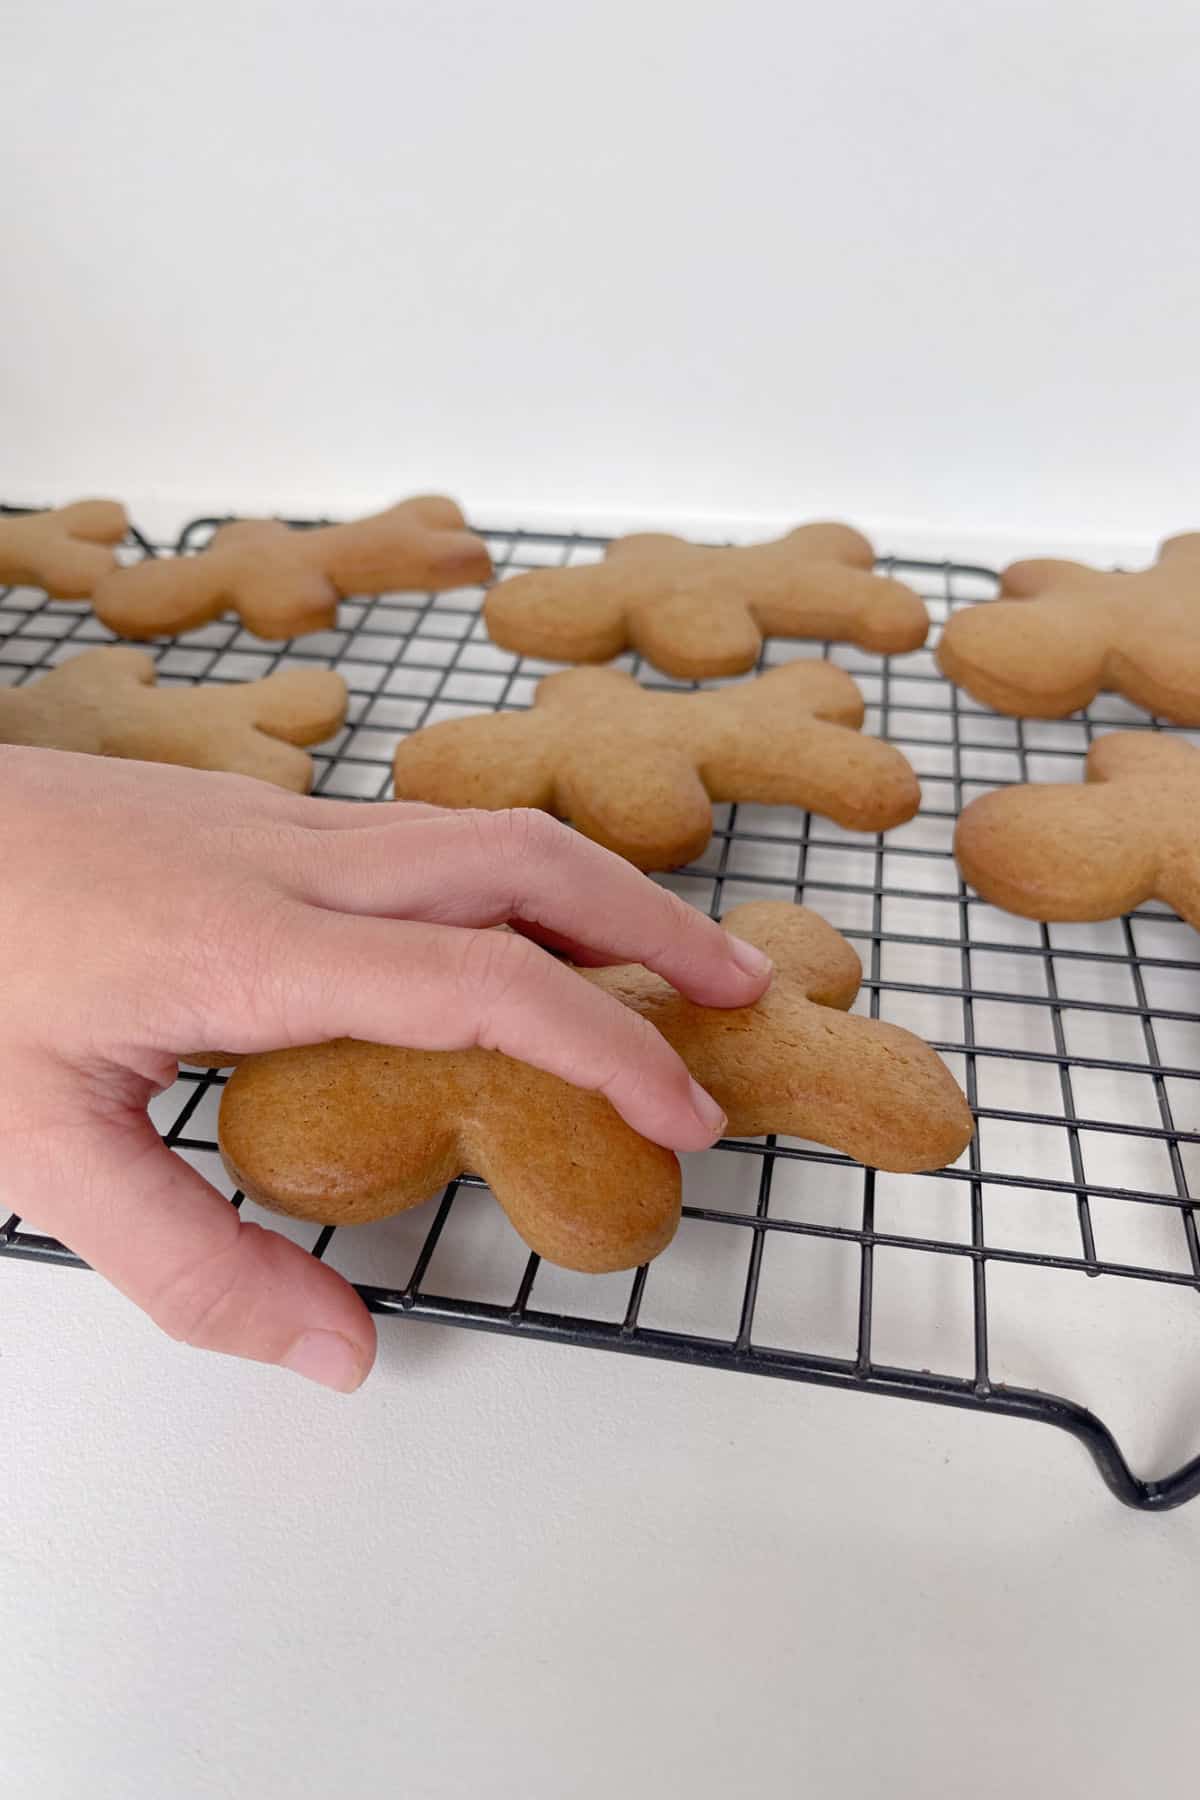 child's hand reaching for a gingerbread biscuit.